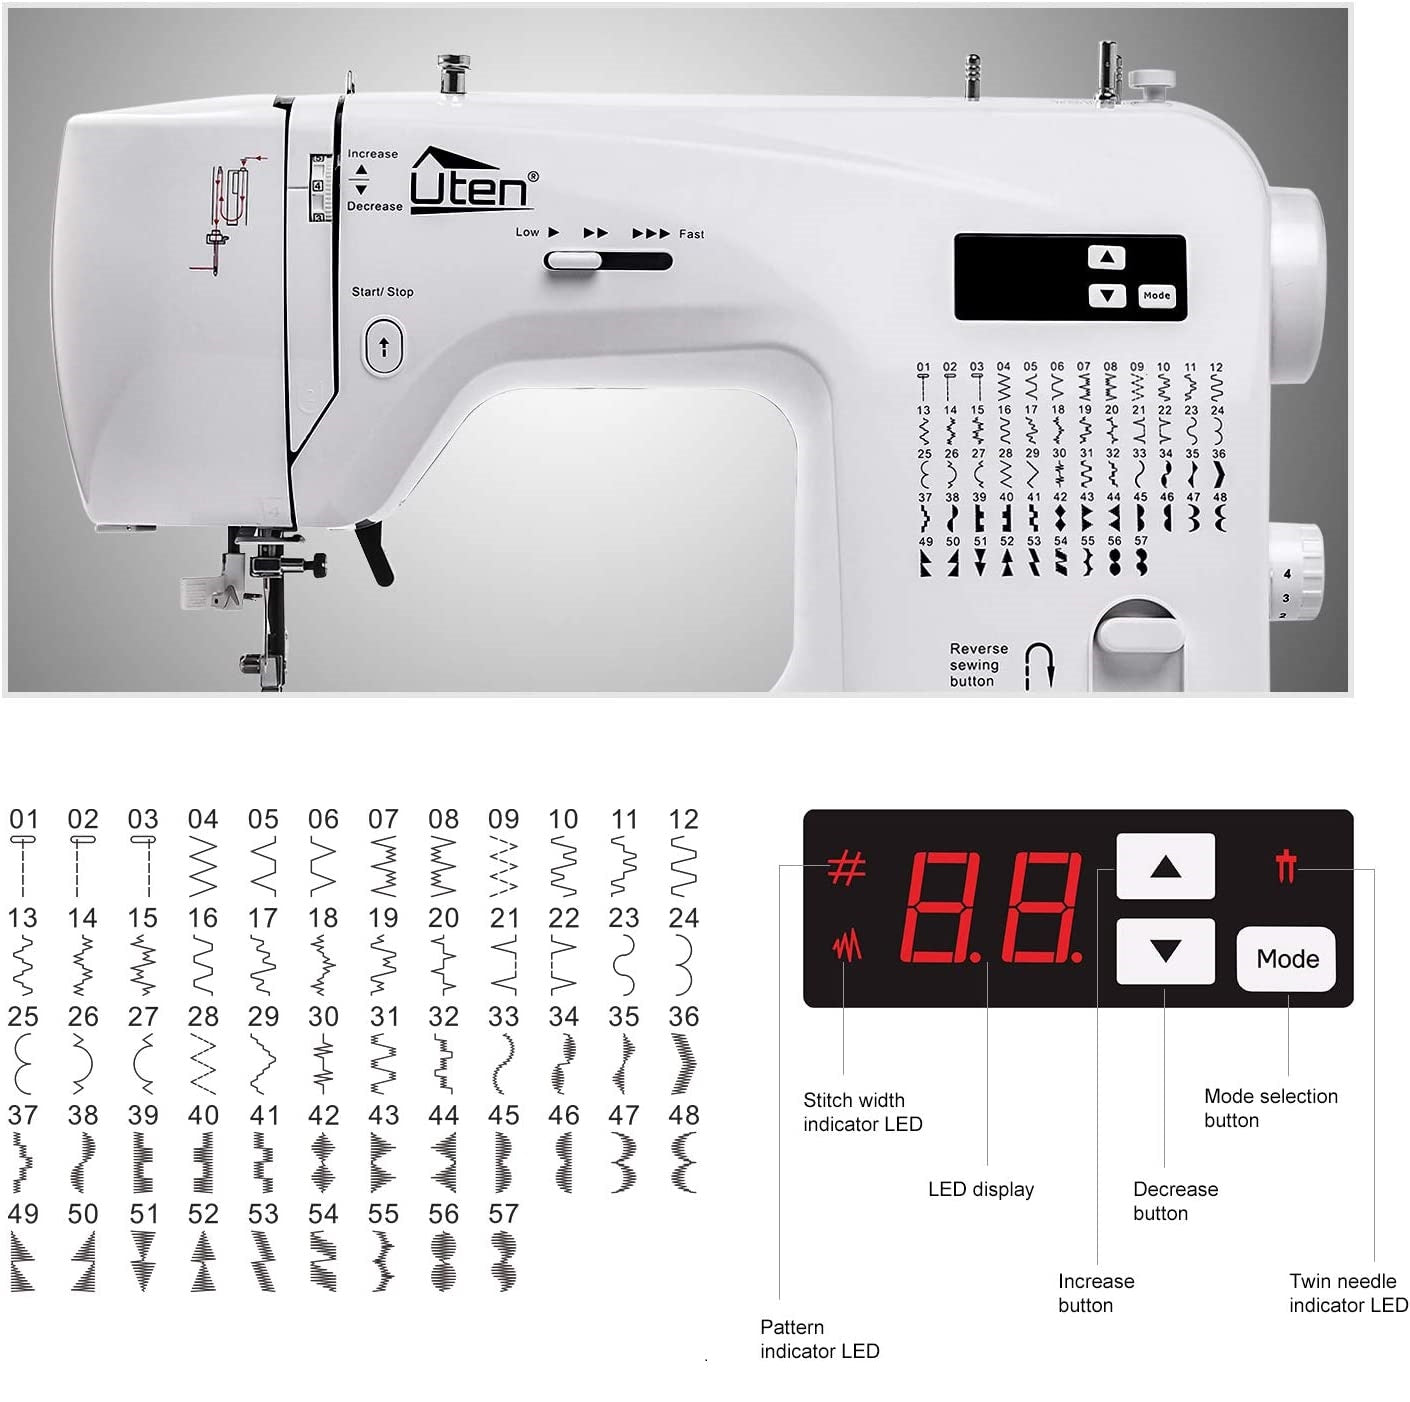 2200 Sewing Machine - All-In-One Computerized Embroidery & Quilting